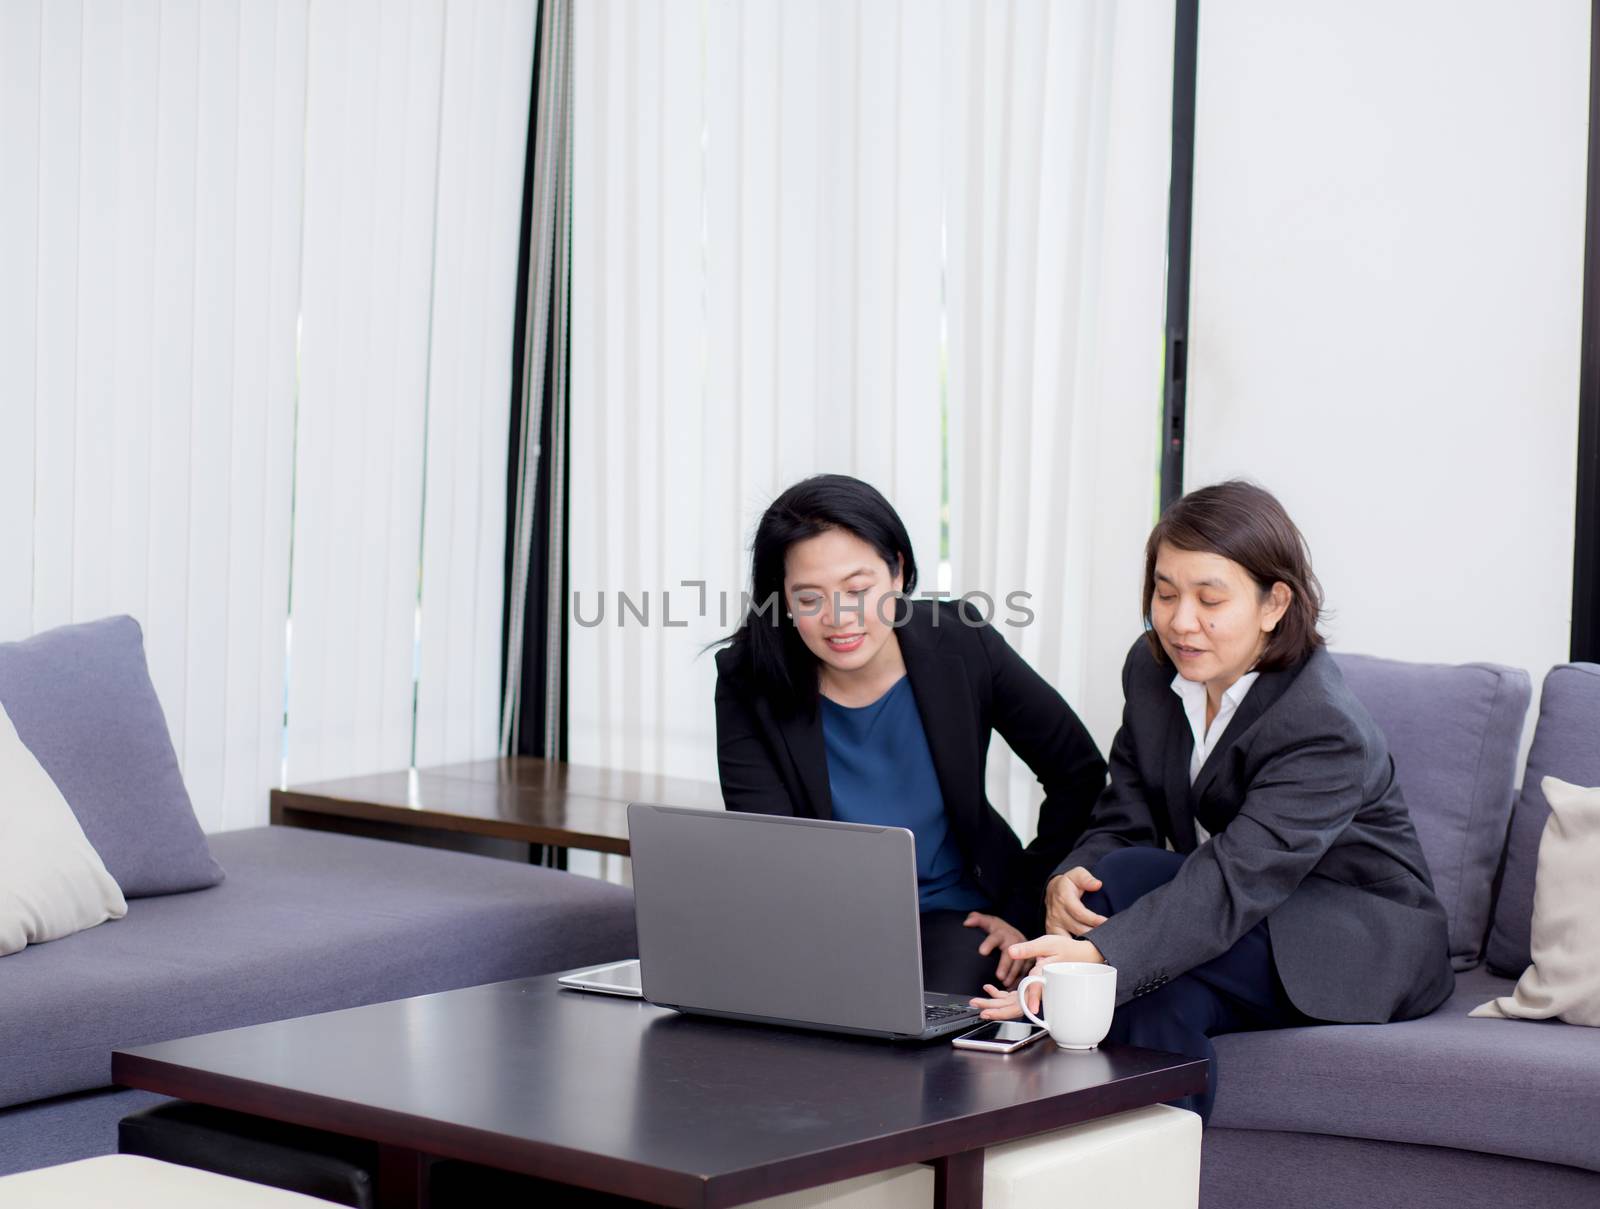 senior and junior businesswoman discuss something during their meeting.